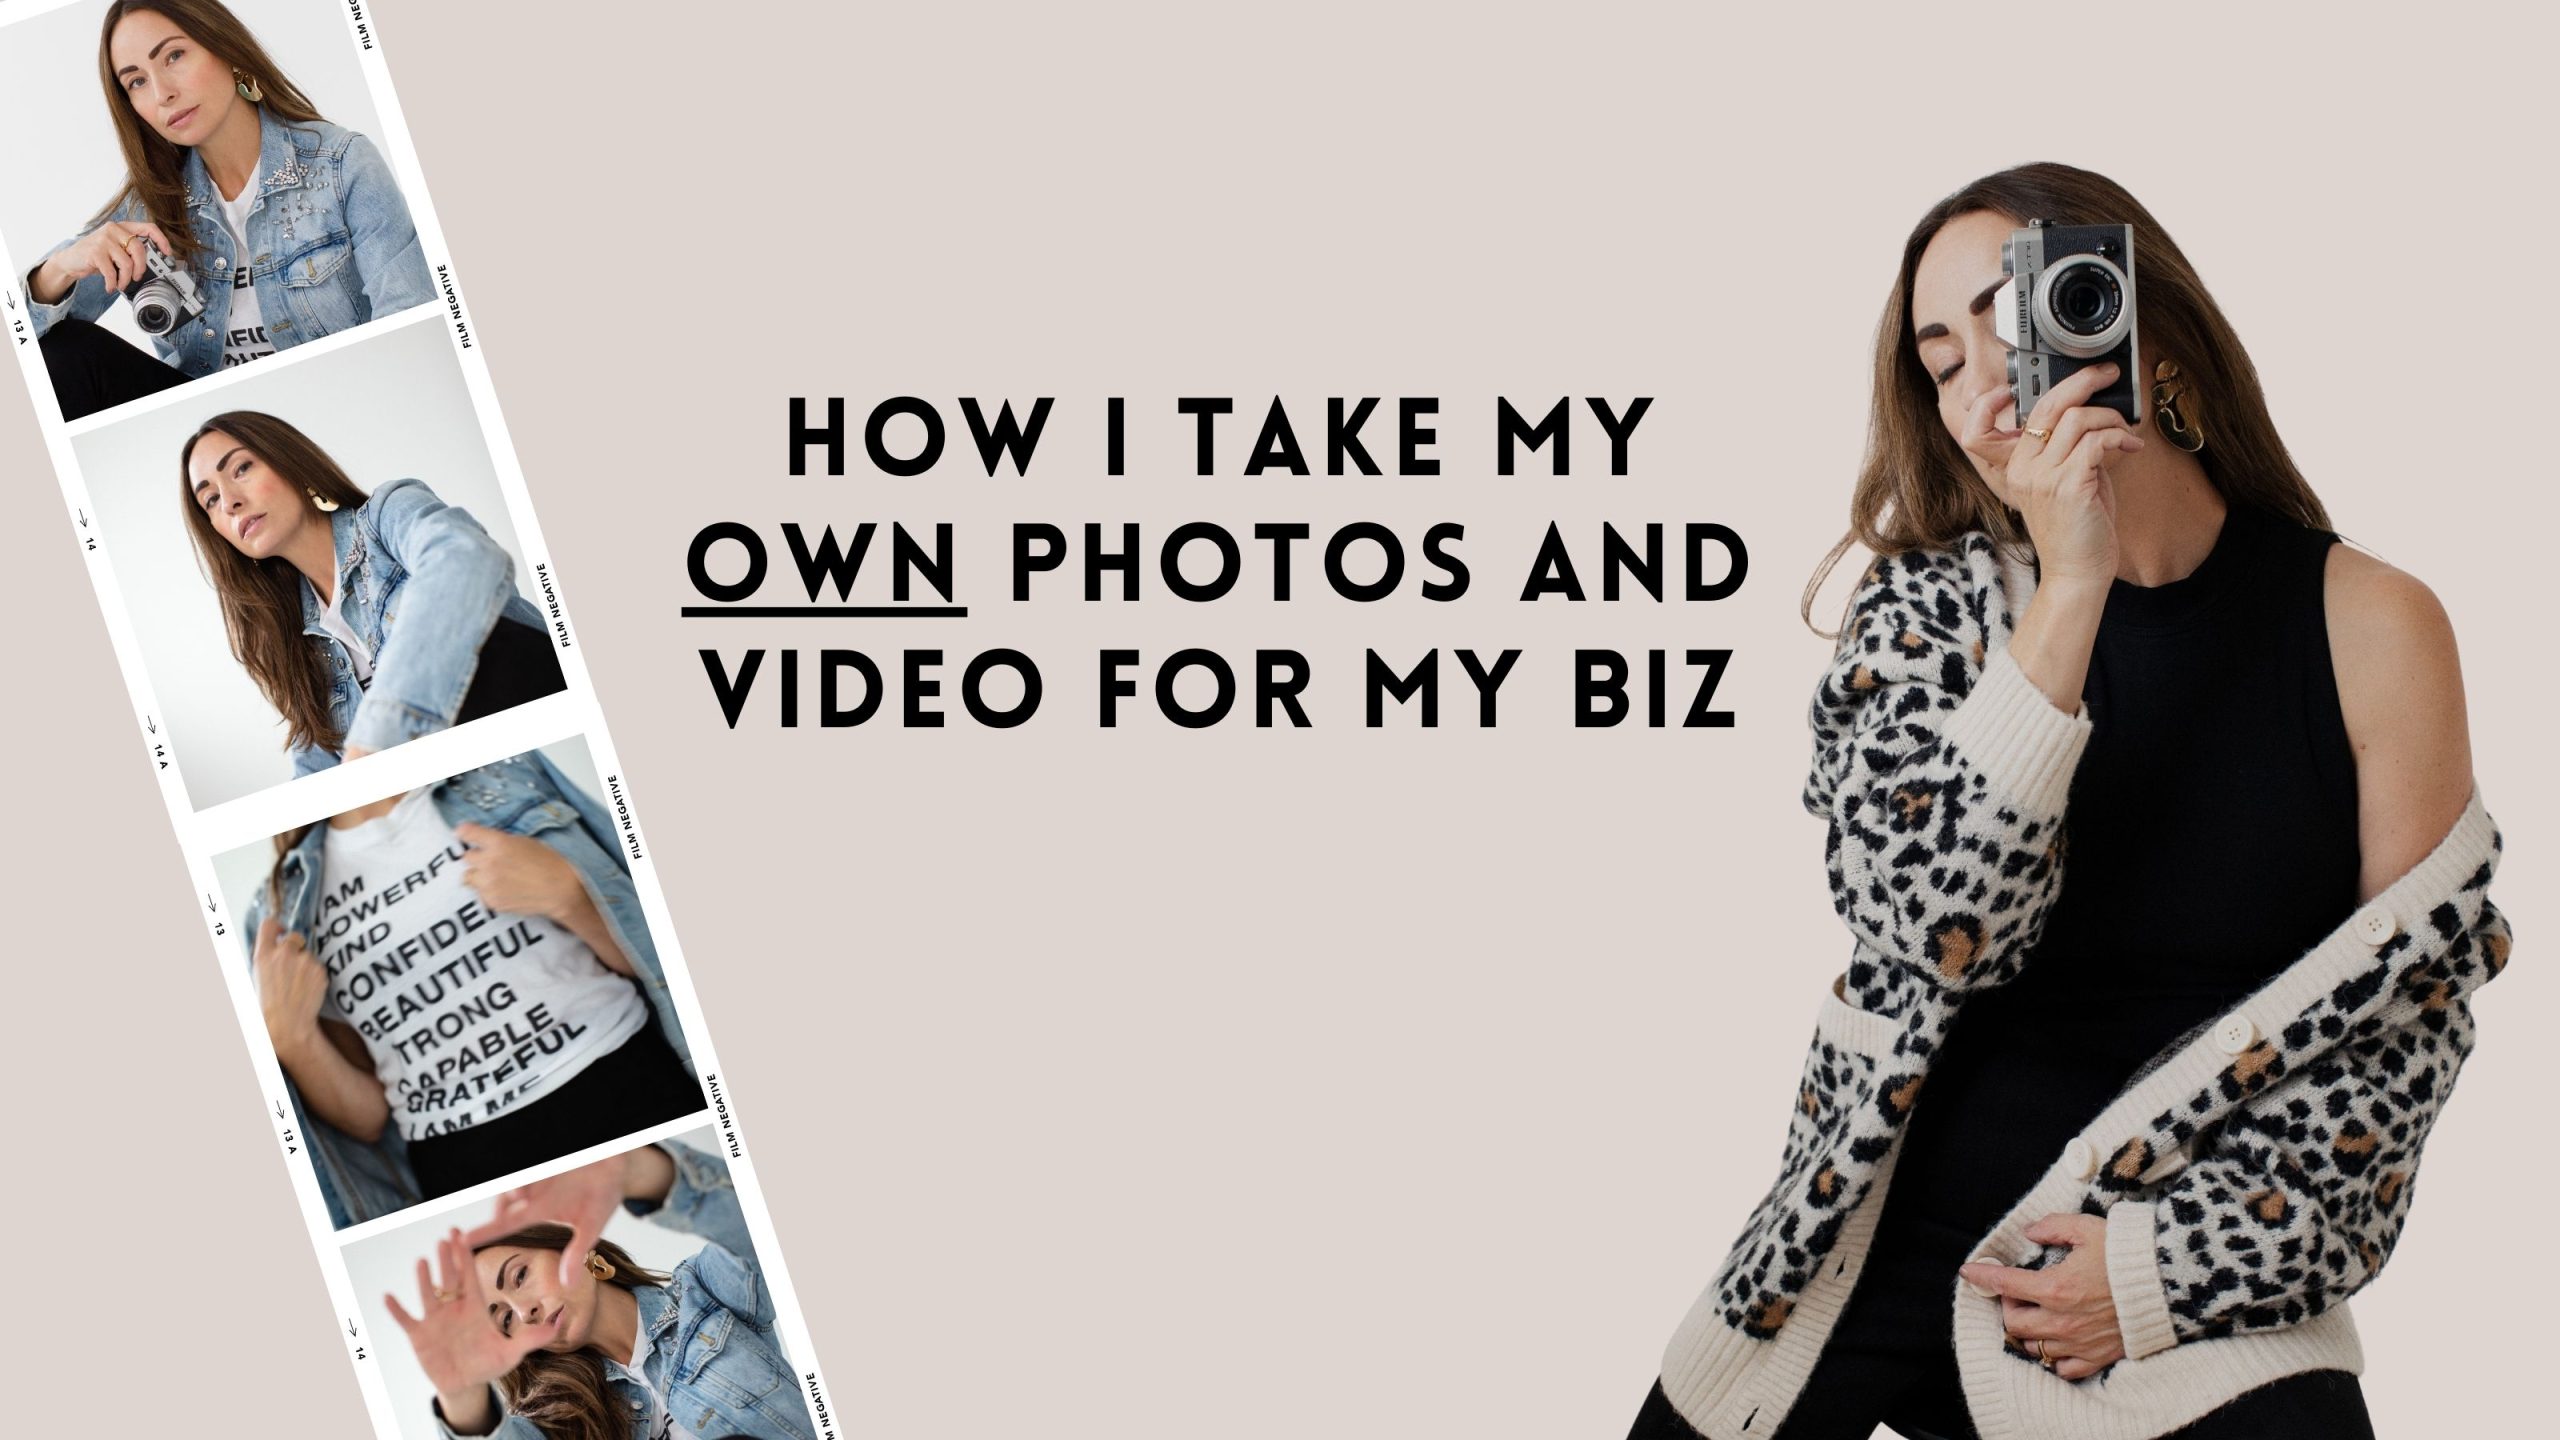 How to shoot your own photos and video for your business